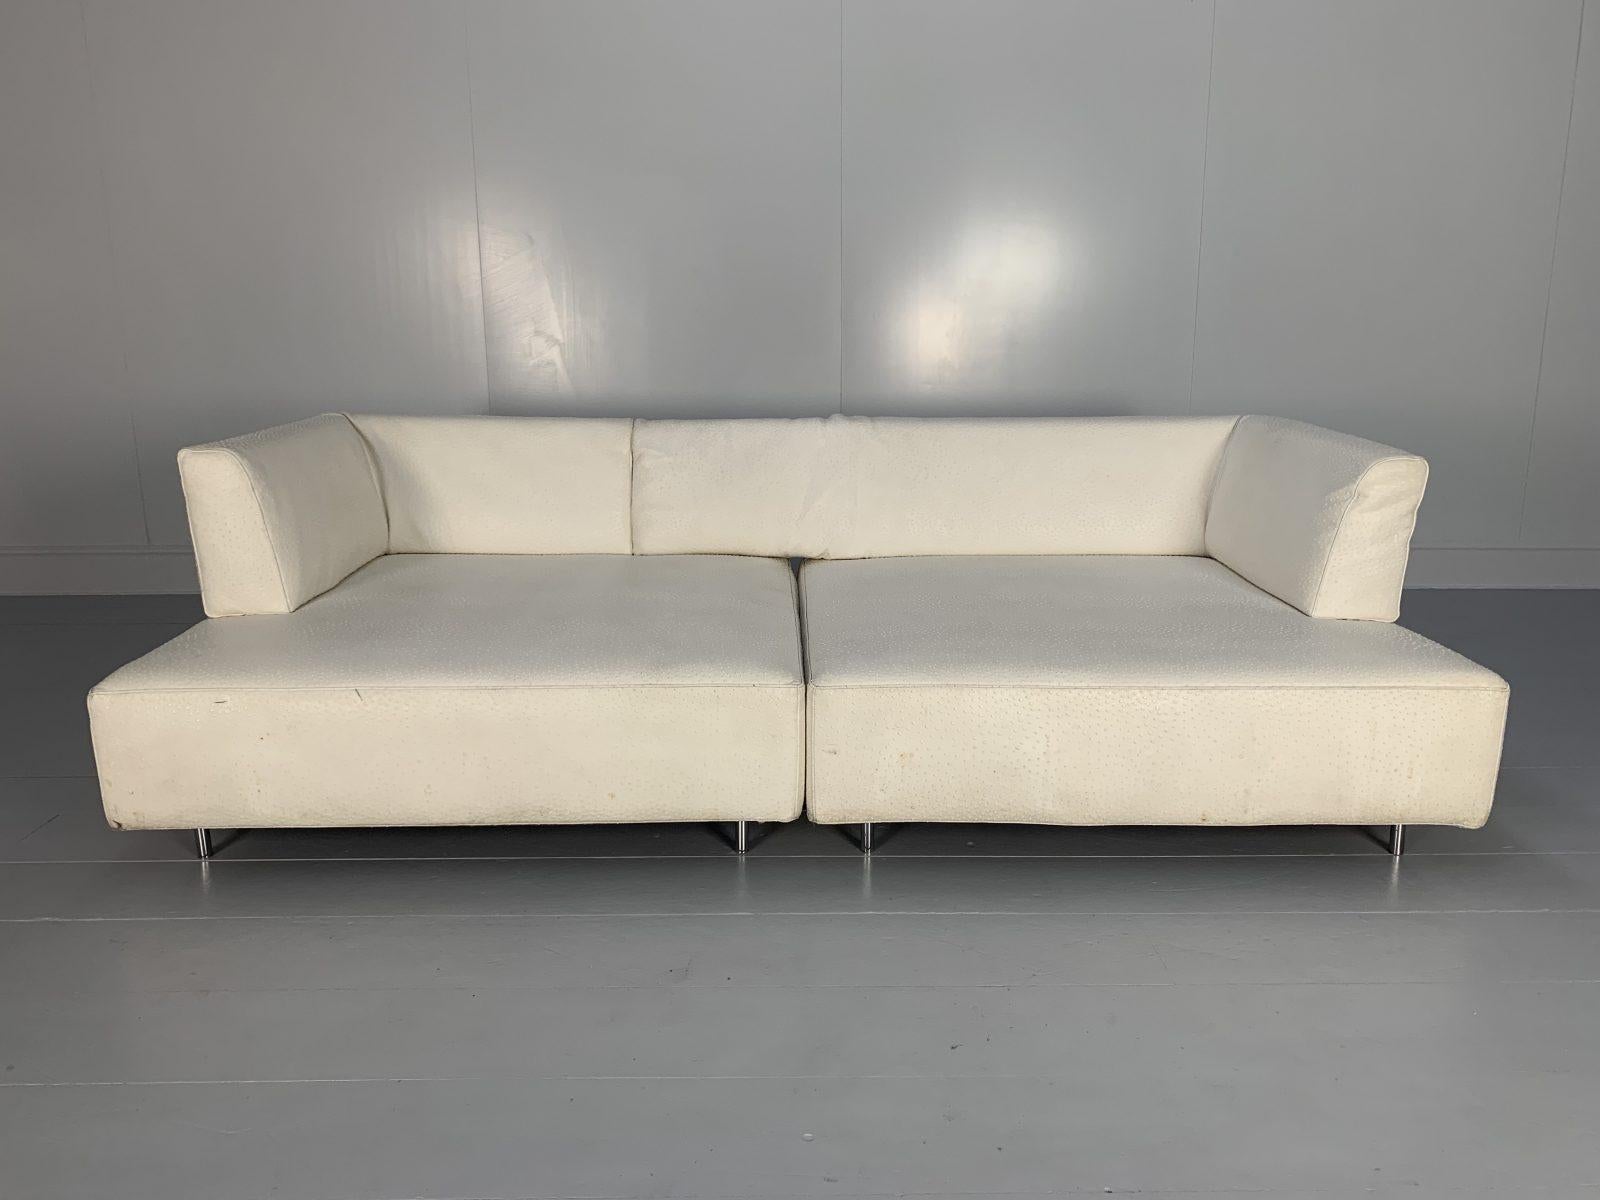 This is an exceptionally-rare example of the iconic “L’Homme Et La Femme” Sofa, from the world renown Italian furniture house of Edra.

In a world of temporary pleasures, Edra create beautiful furniture that remains a joy forever.

Dressed in